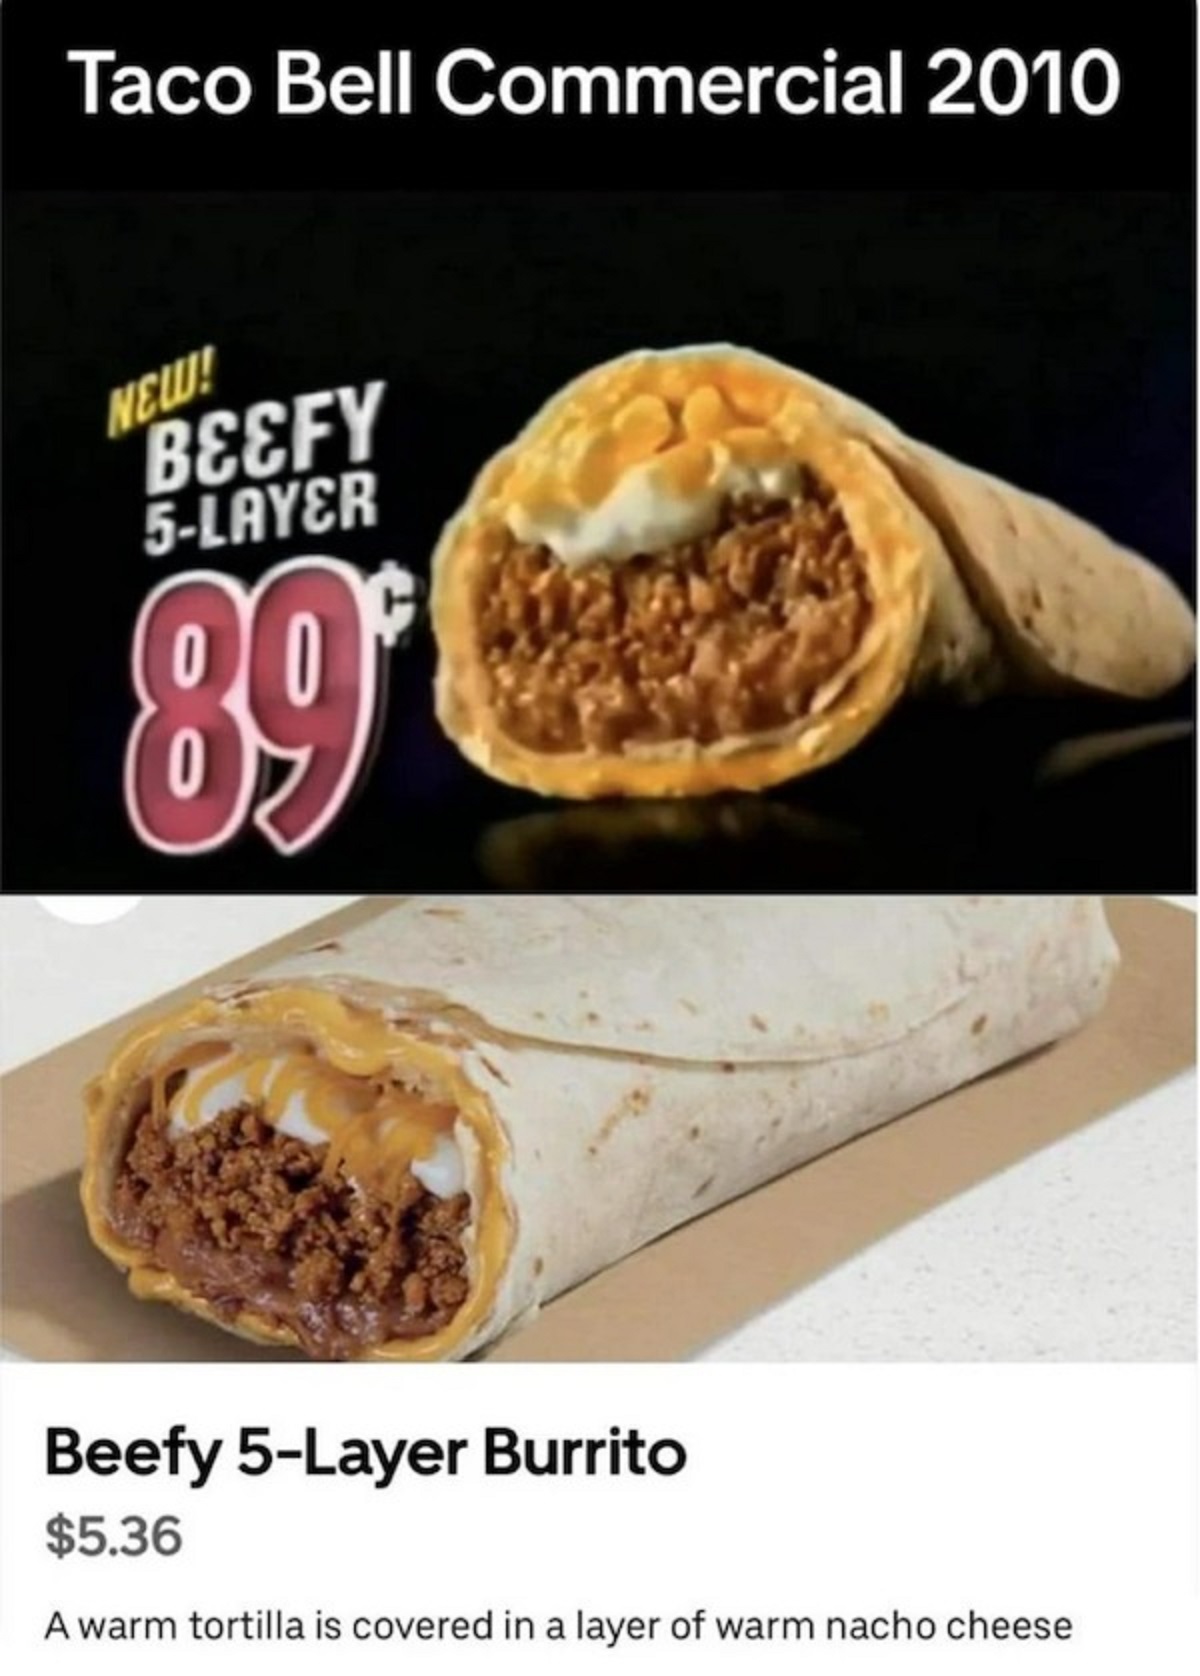 beefy 5 layer burrito price - Taco Bell Commercial 2010 New! Beefy 5Layer 89 Beefy 5Layer Burrito $5.36 A warm tortilla is covered in a layer of warm nacho cheese